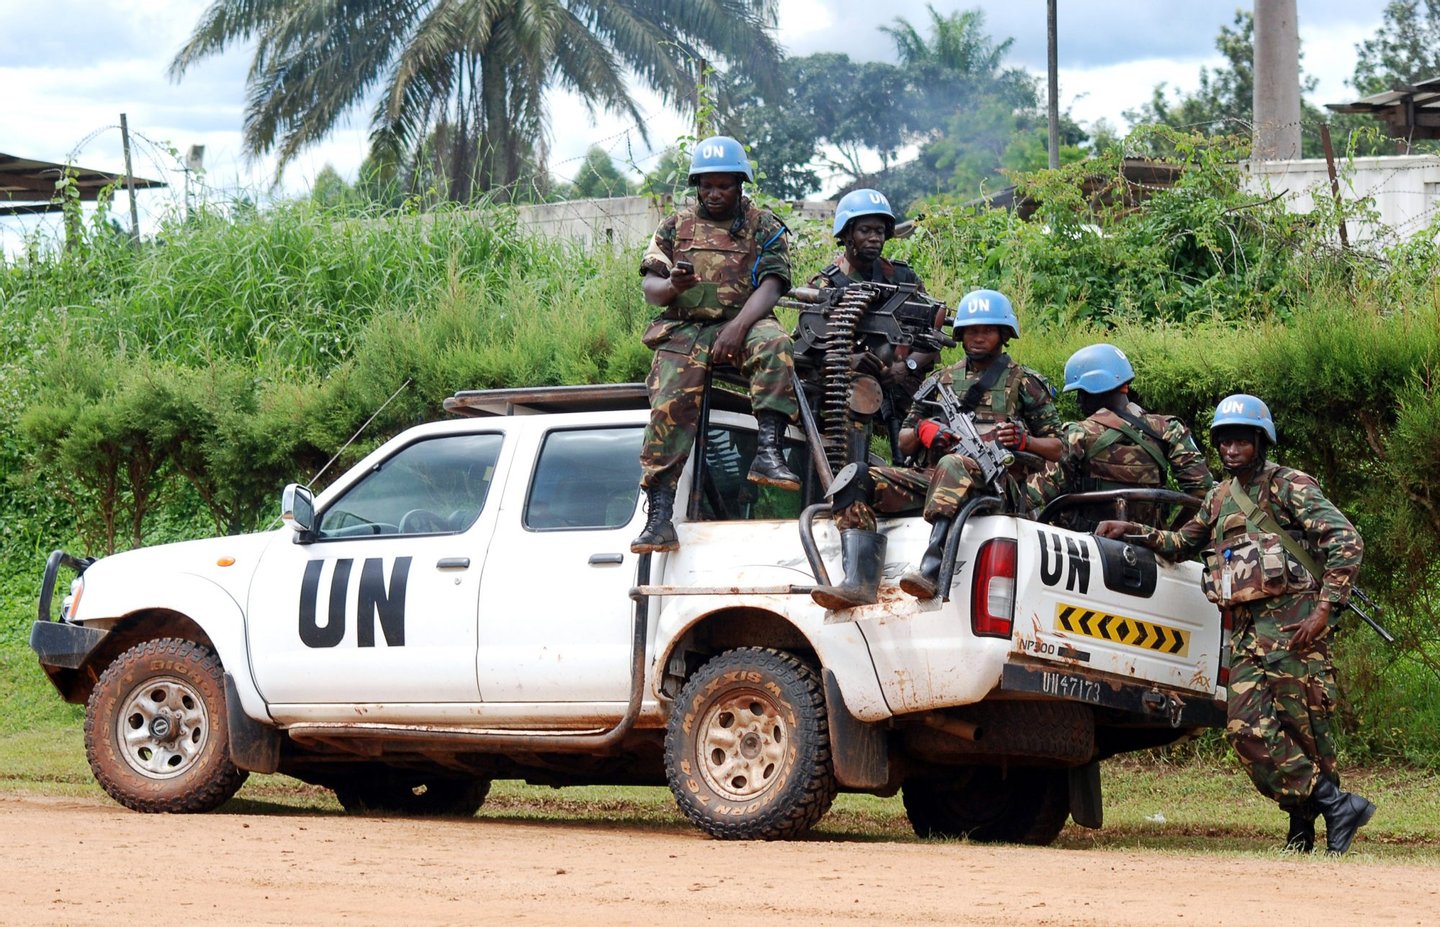 Blue helmet members of the United Nations Organization Stabilization Mission in the Democratic Republic of Congo MONUSCO sit on the back of a UN pick-up truck on October 23, 2014 in Beni. Several violent protests have erupted since October 21 in the east of the Democratic Republic of Congo to demand the departure of MONUSCO, accused of failing to prevent recent massacres in the Beni territory, attributed to Islamist Ugandan rebels of the Allied Democratic Forces (ADF), in which 80 civilians were killed in less than two weeks. AFP PHOTO / ALAIN WANDIMOYI (Photo credit should read ALAIN WANDIMOYI/AFP/Getty Images)